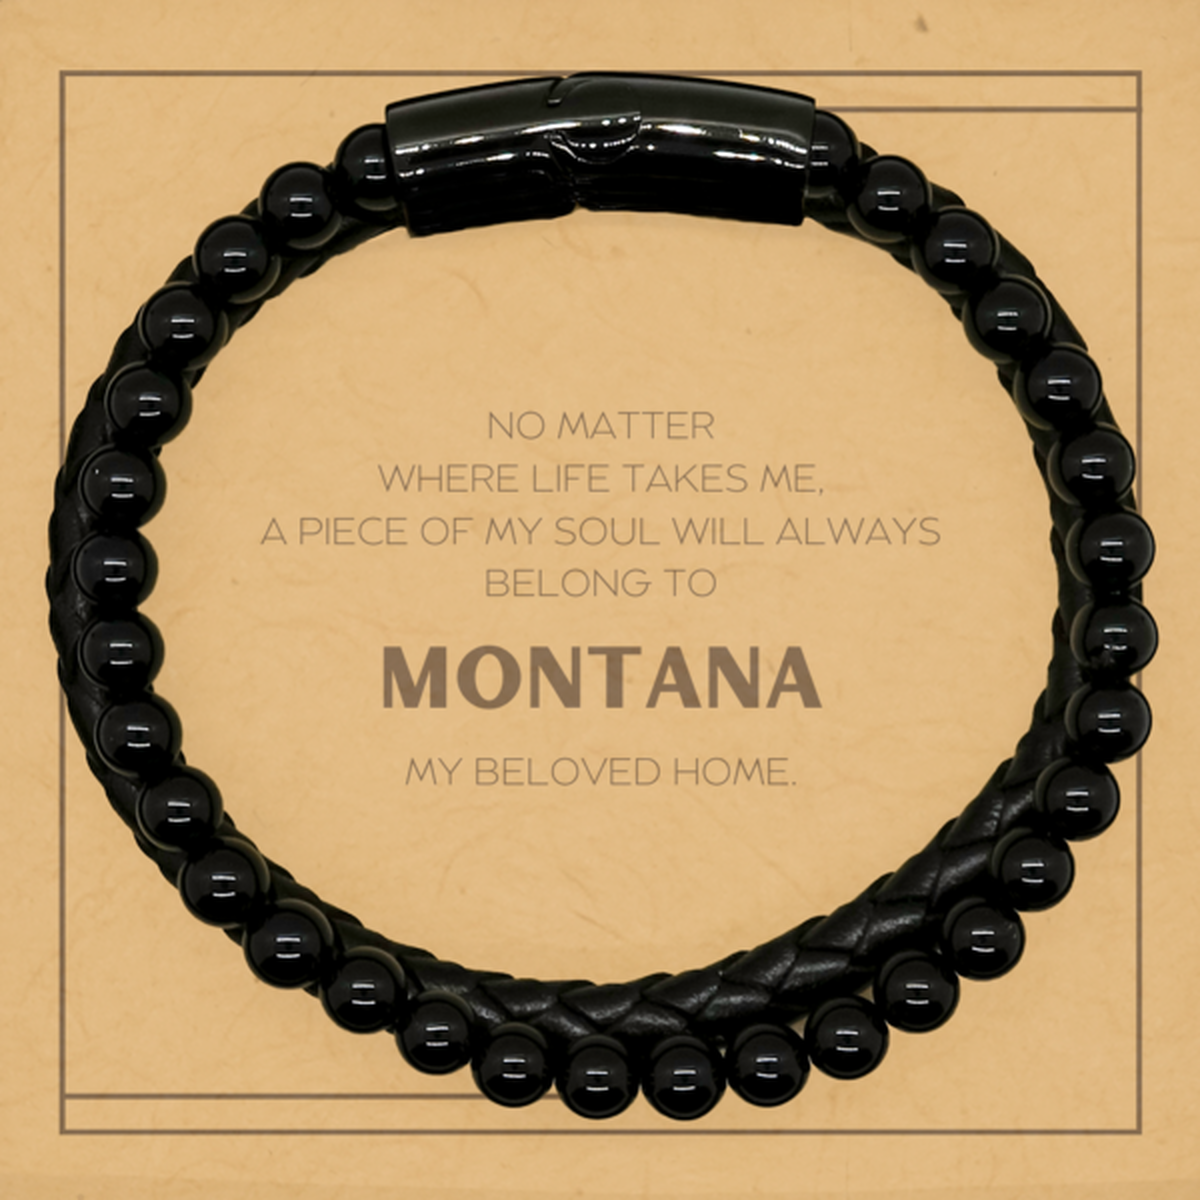 Love Montana State Gifts, My soul will always belong to Montana, Proud Stone Leather Bracelets, Birthday Unique Gifts For Montana Men, Women, Friends